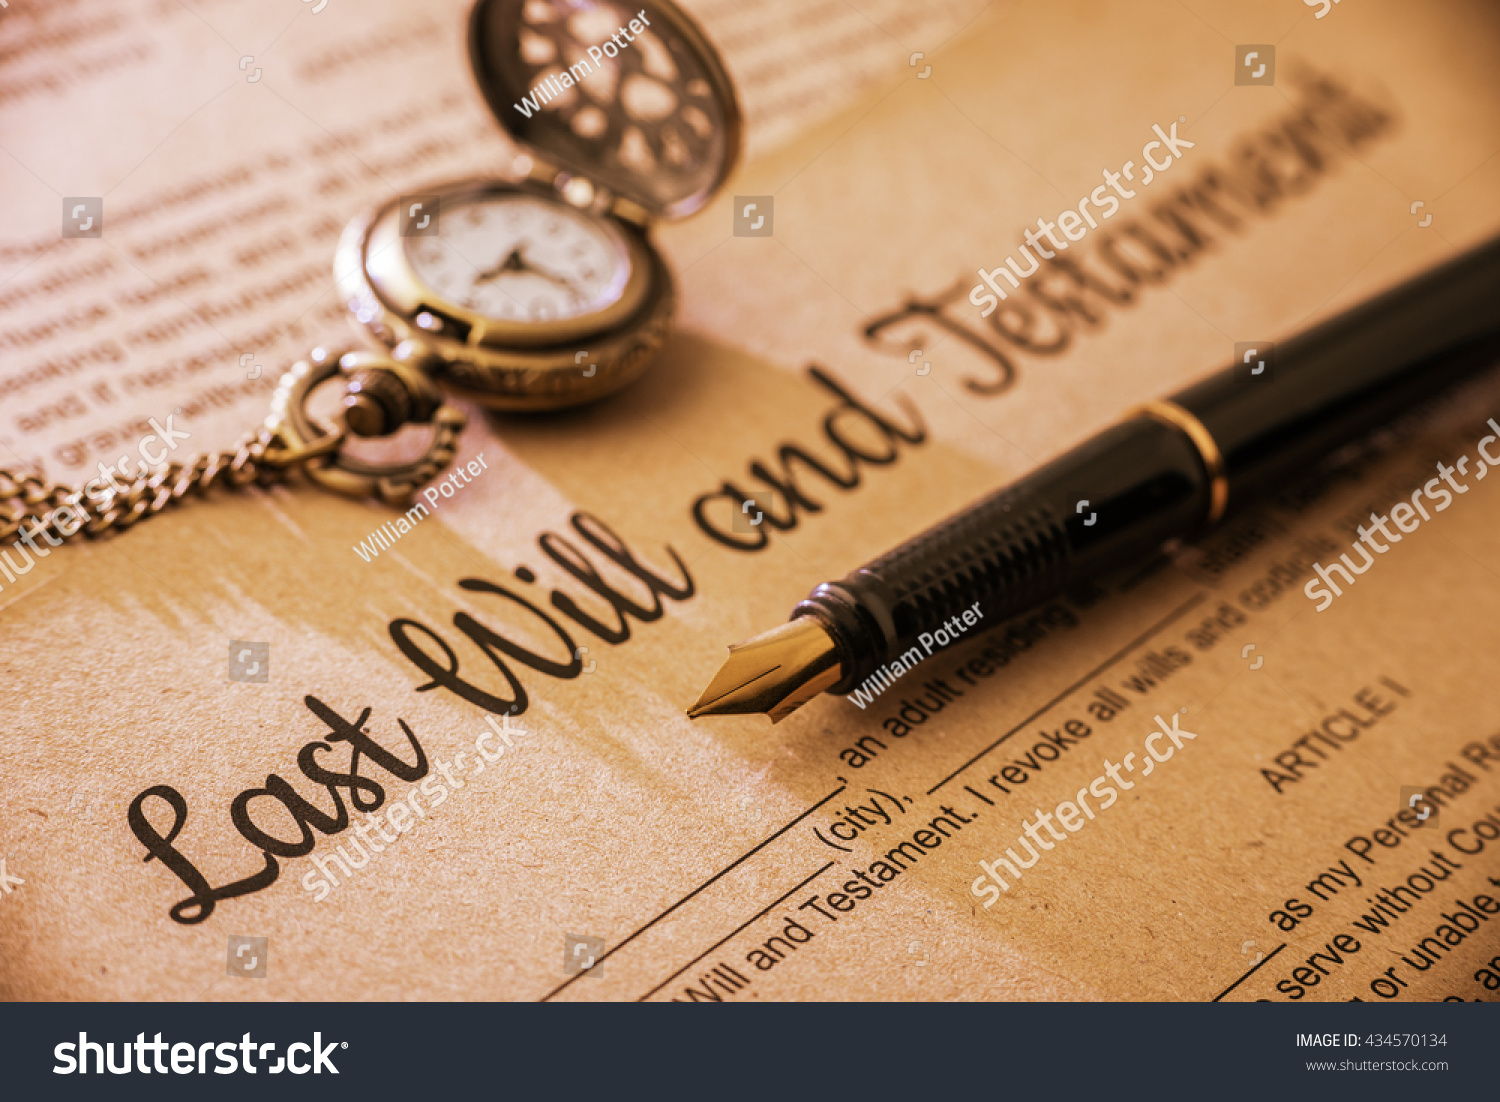 Vintage / retro style with a long shadow : Fountain pen, a pocket watch on a last will and testament. A form is printed on a mulberry paper and waiting to be filled and signed by testator / testatrix. #434570134